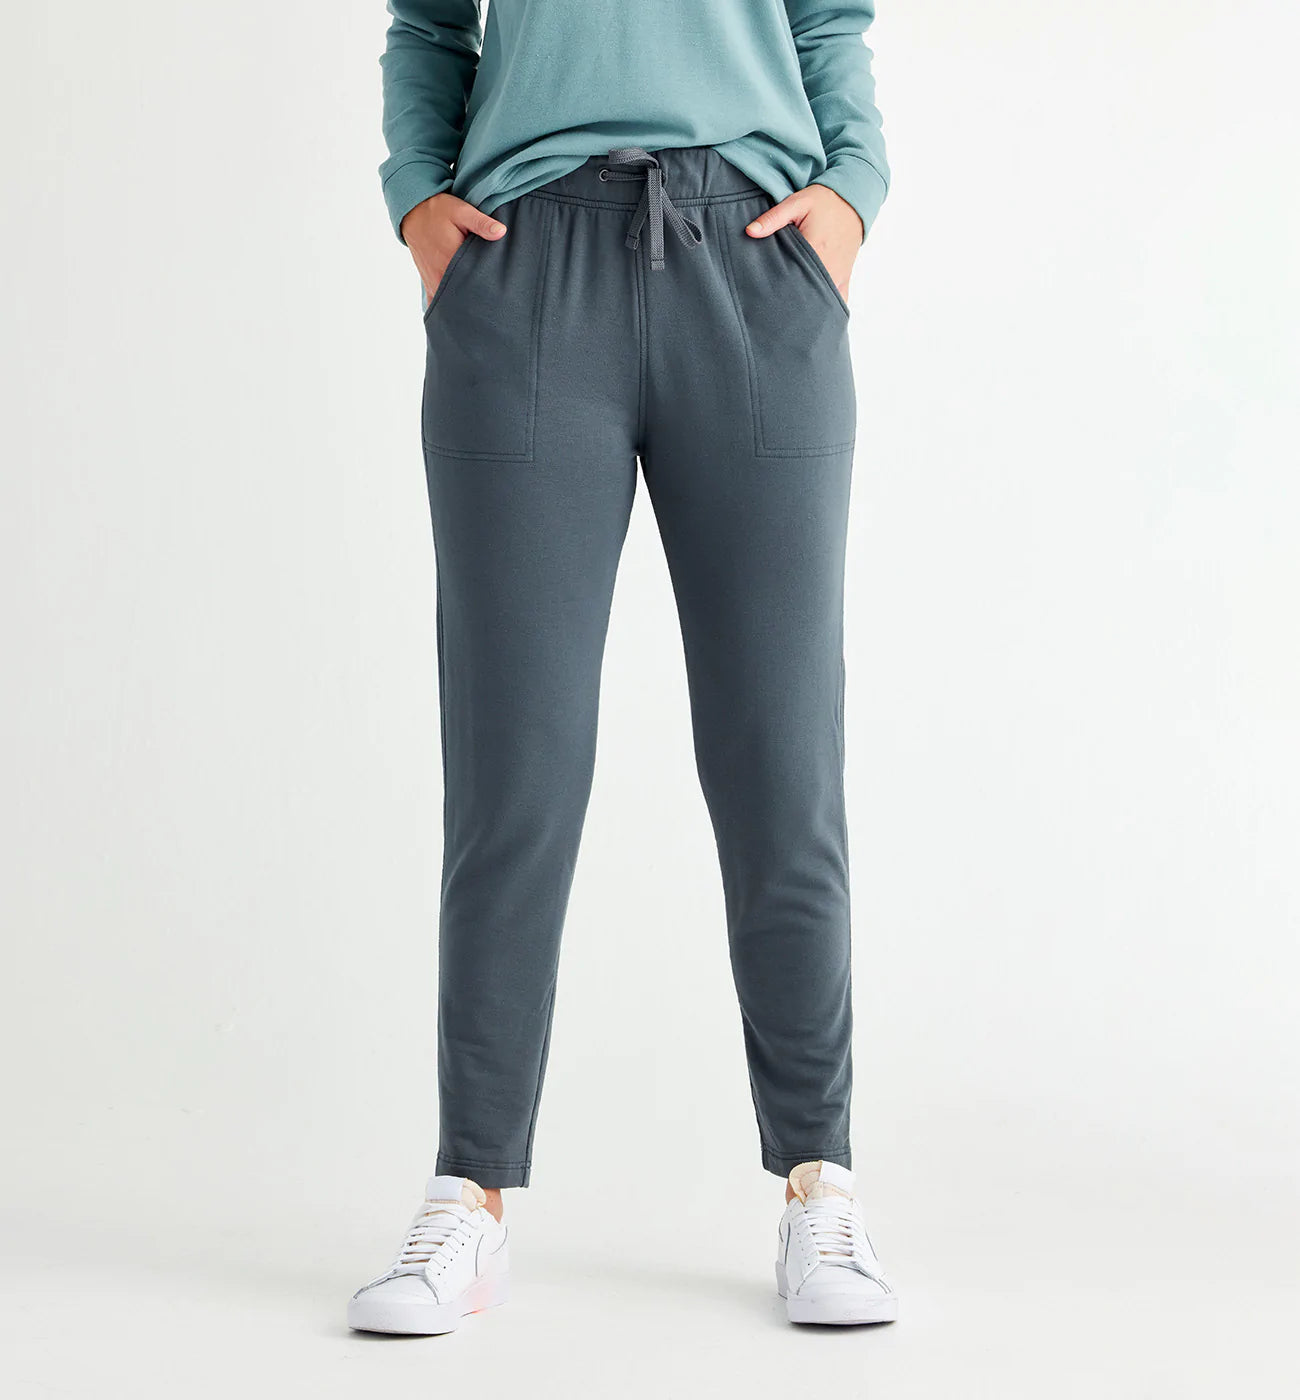 Up To 88% Off on Women's Loose Fit Fleece-Line